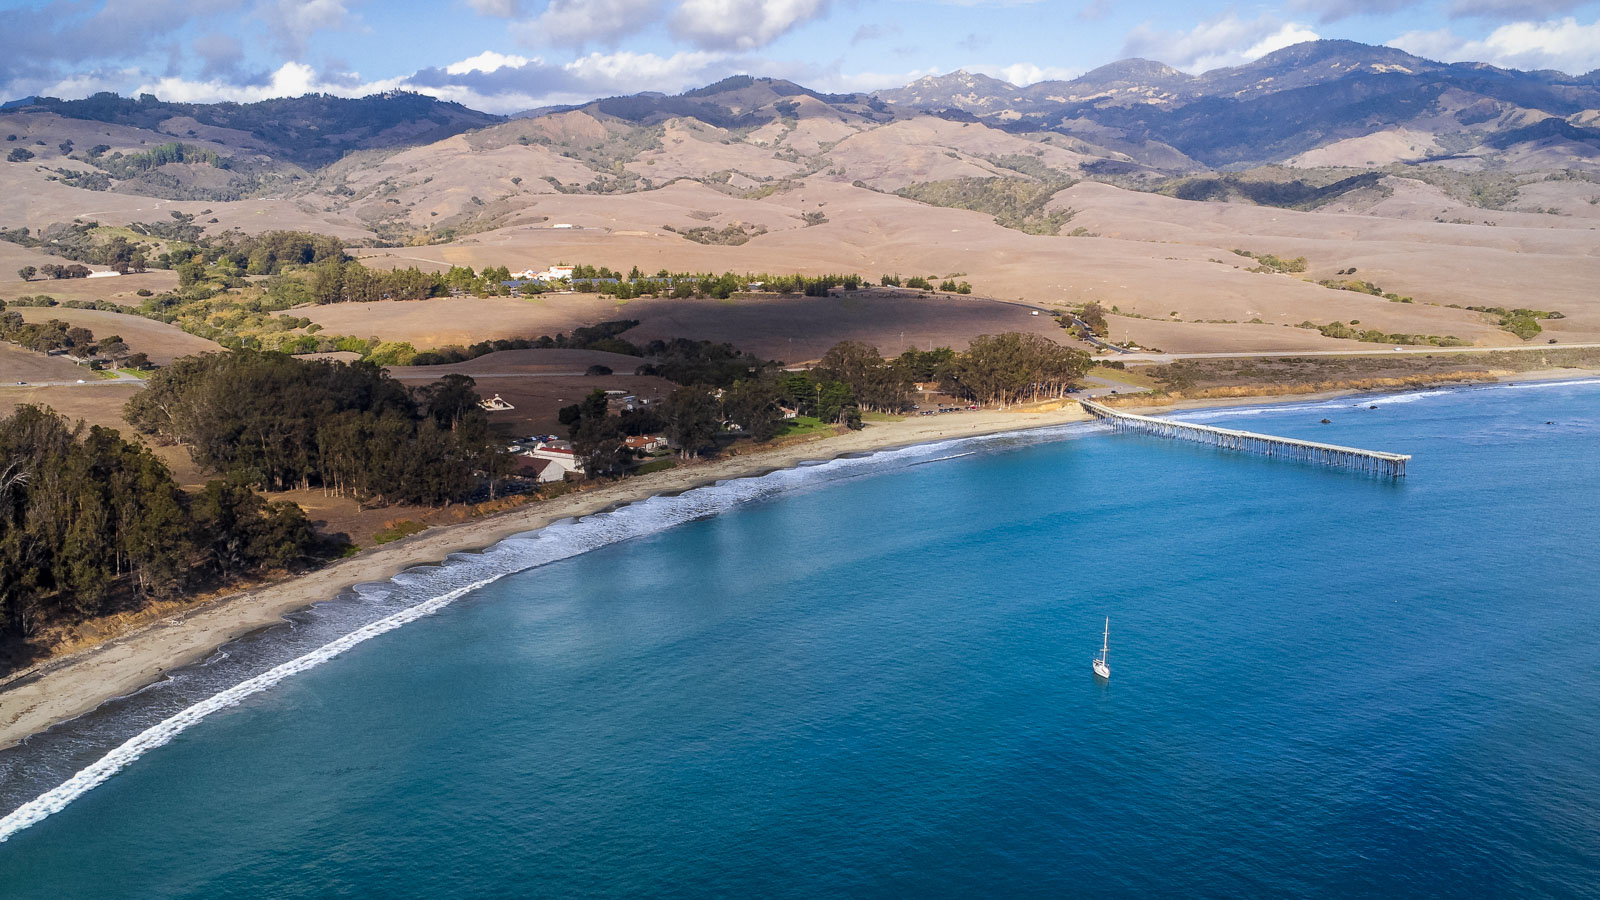 An aerial view of Hearst Ranch, with San Simeon Pier and the ocean visible.